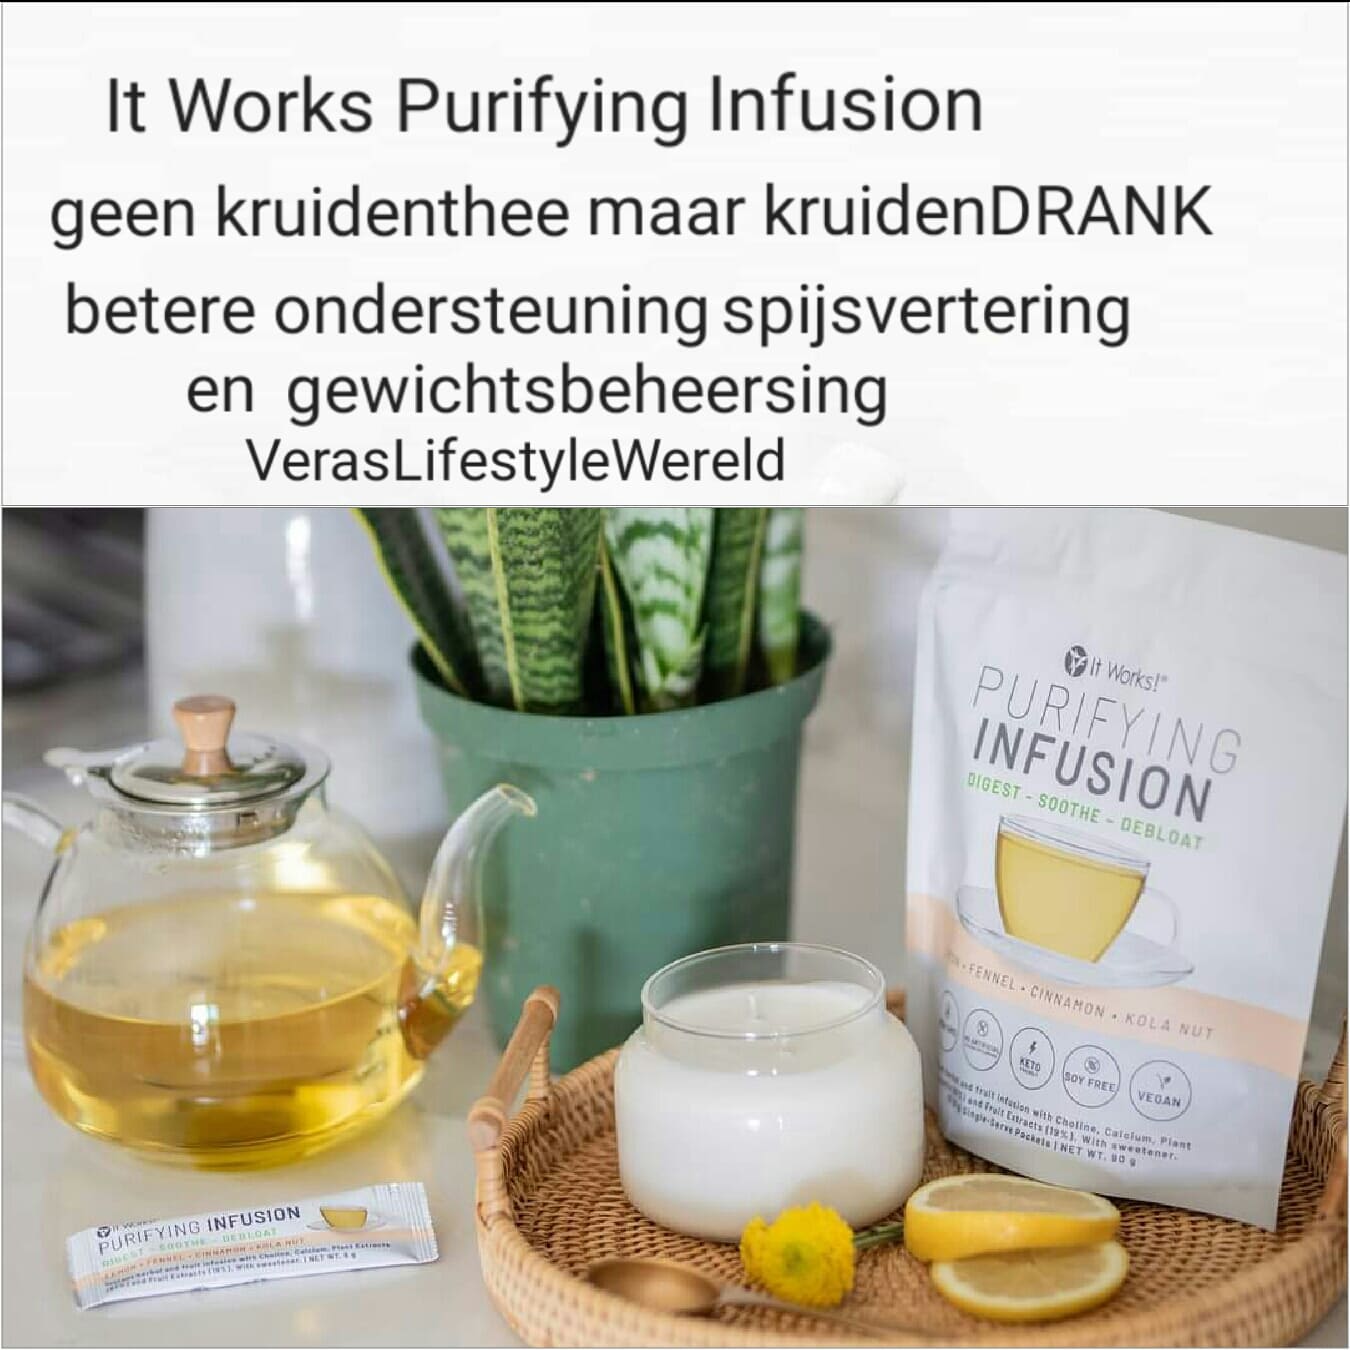 It Works Purifying Infusion